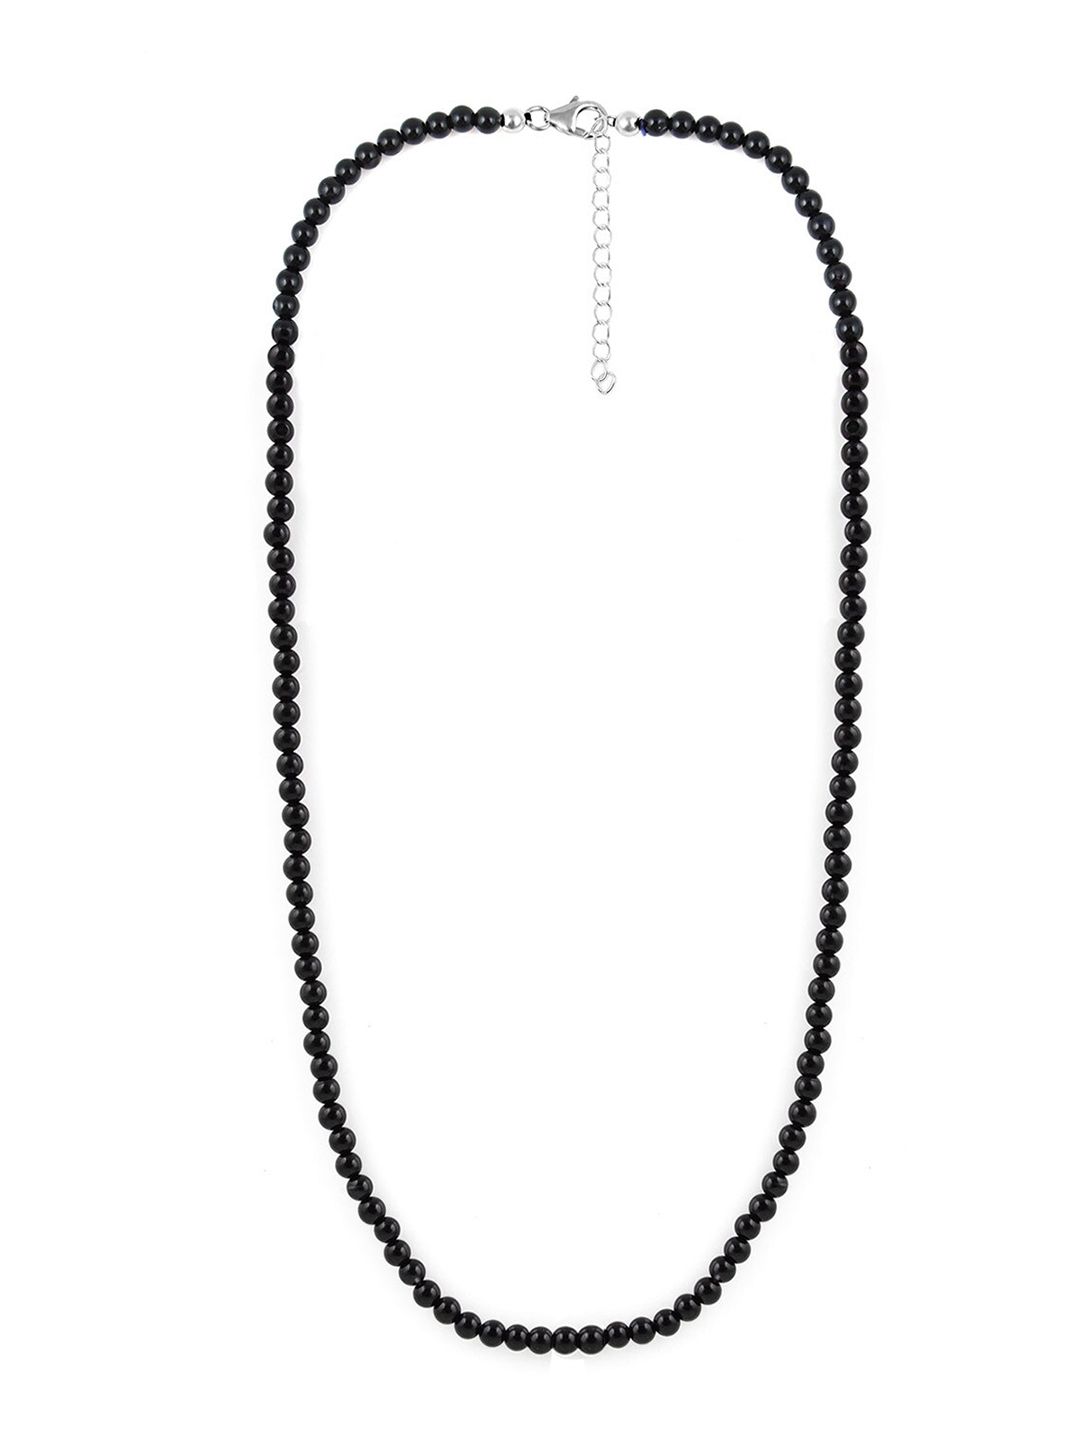 LA SOULA Black Sterling Silver Handcrafted Necklace Price in India